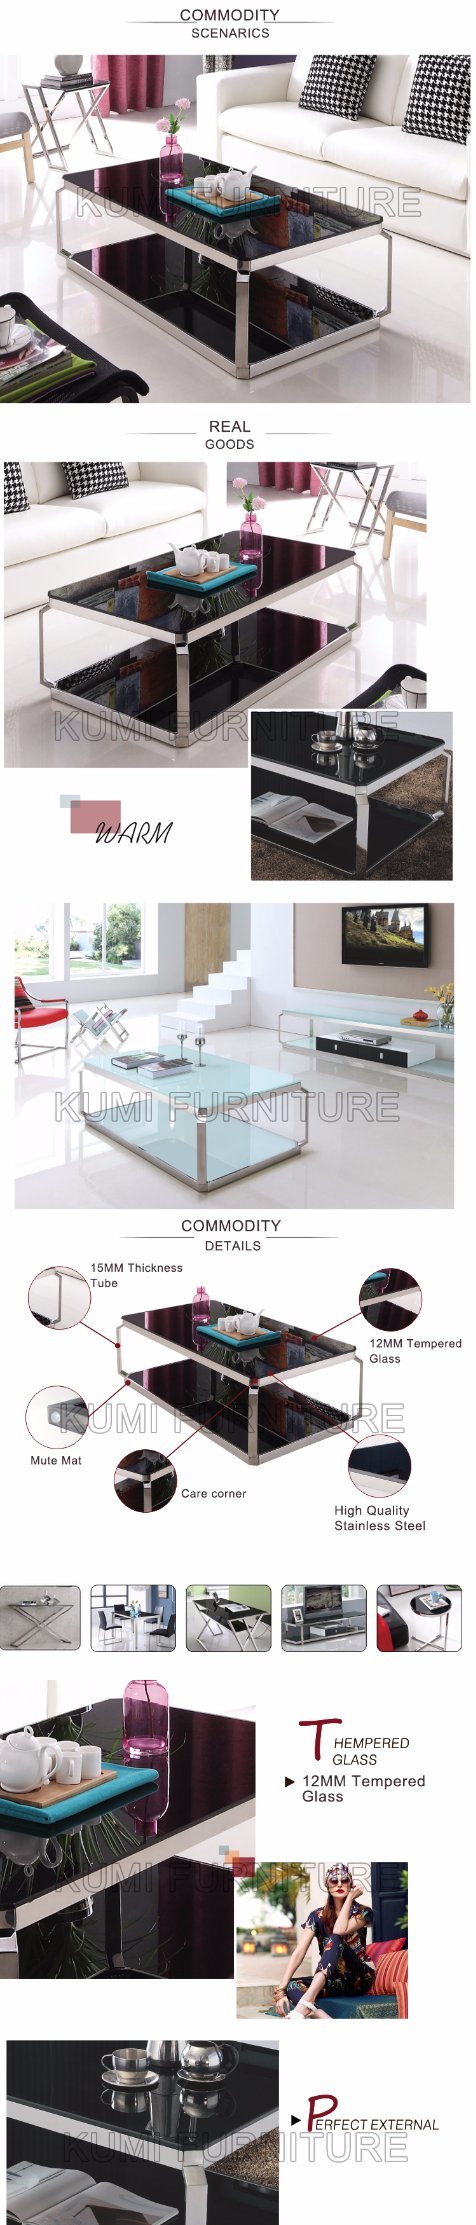 Living Room Furniture Glass Top Coffee Table